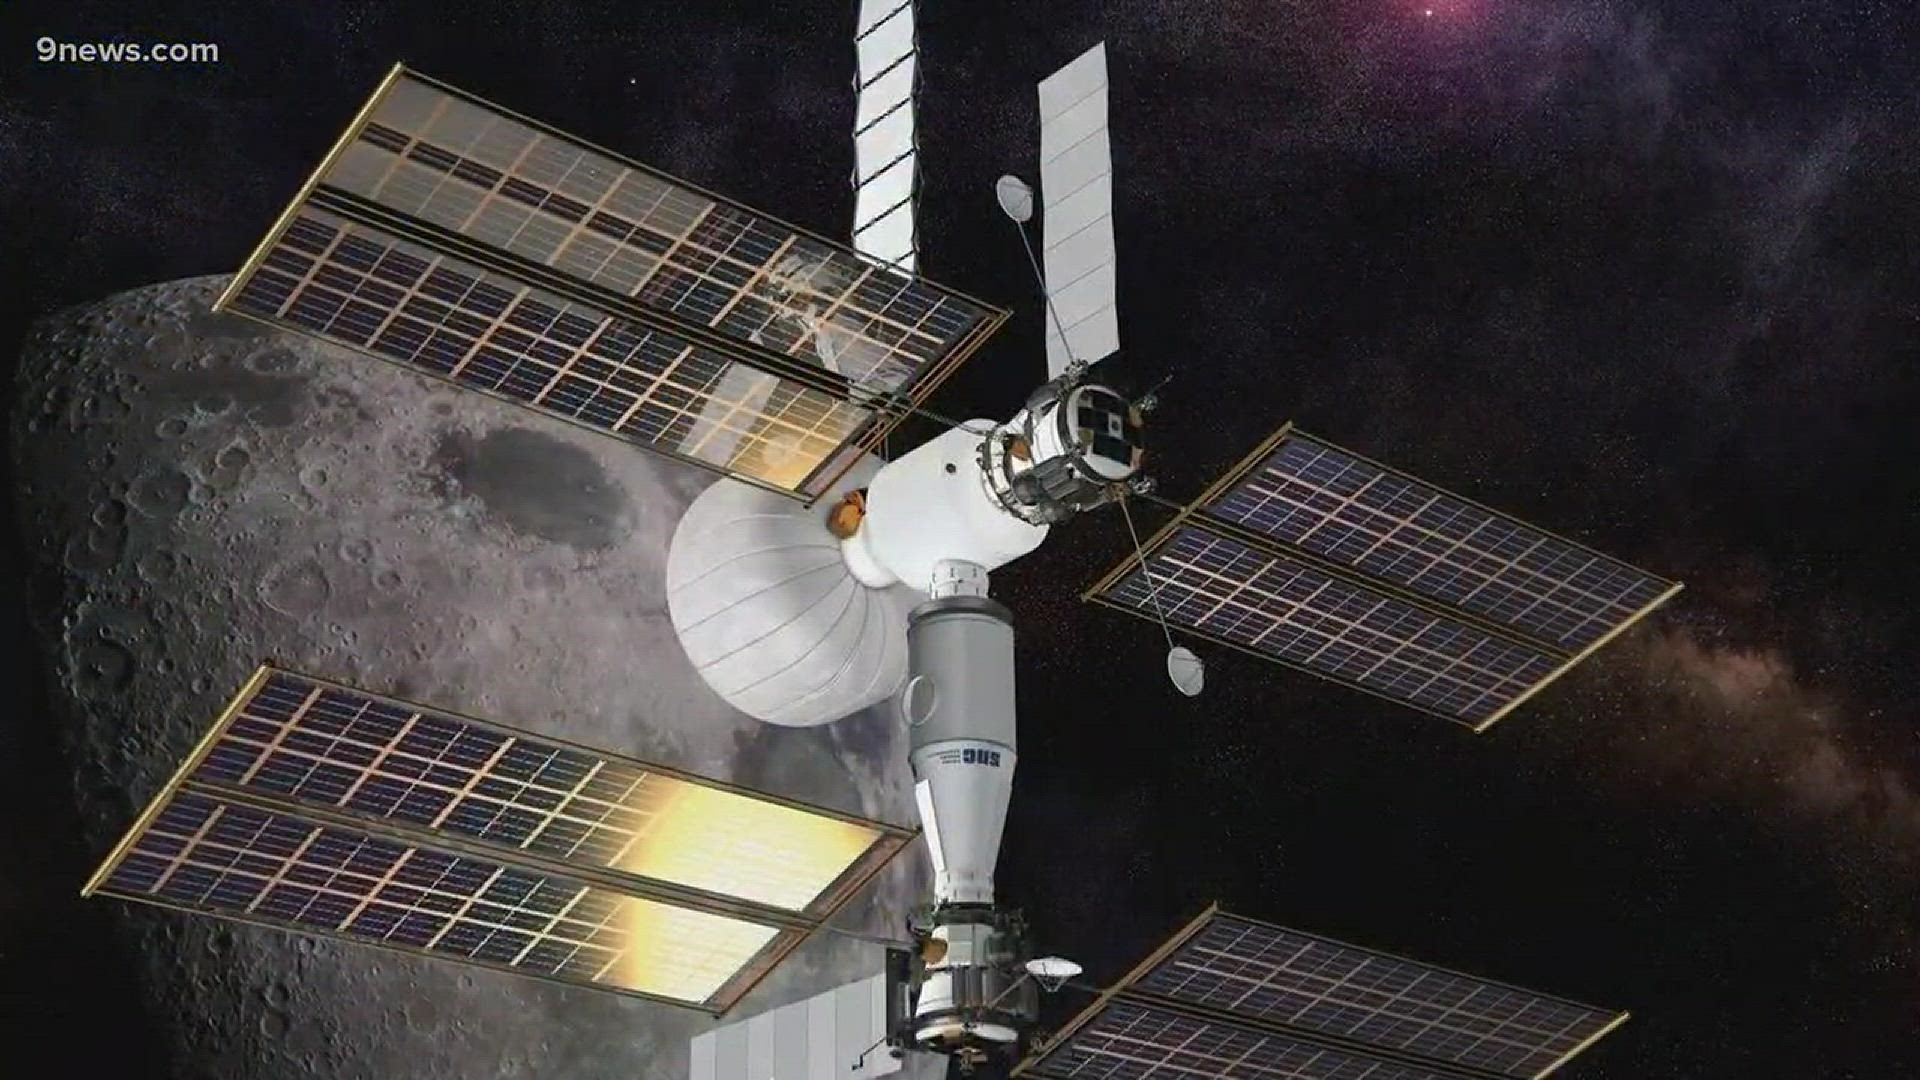 NASA calls it the Lunar Gateway. It will orbit the moon and support lunar landings and deep space missions. Sierra Nevada Corporation in Louisville, Colorado is one of the front runners to build the key components to the lunar orbiting space habitat.